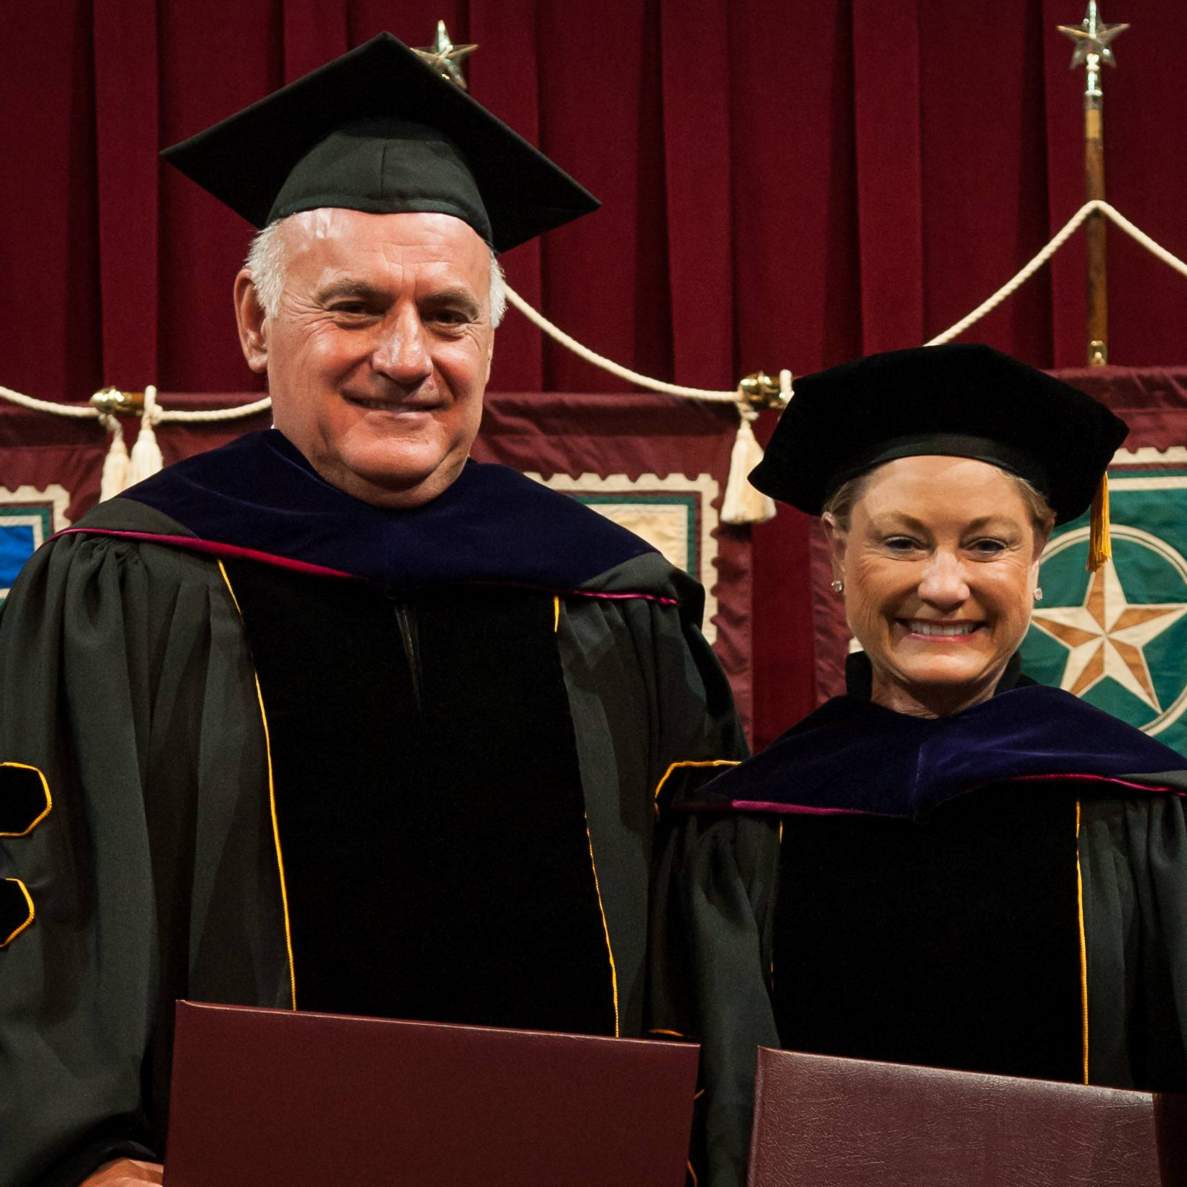 Linda and Jerry Fields presented with Honorary Degrees 